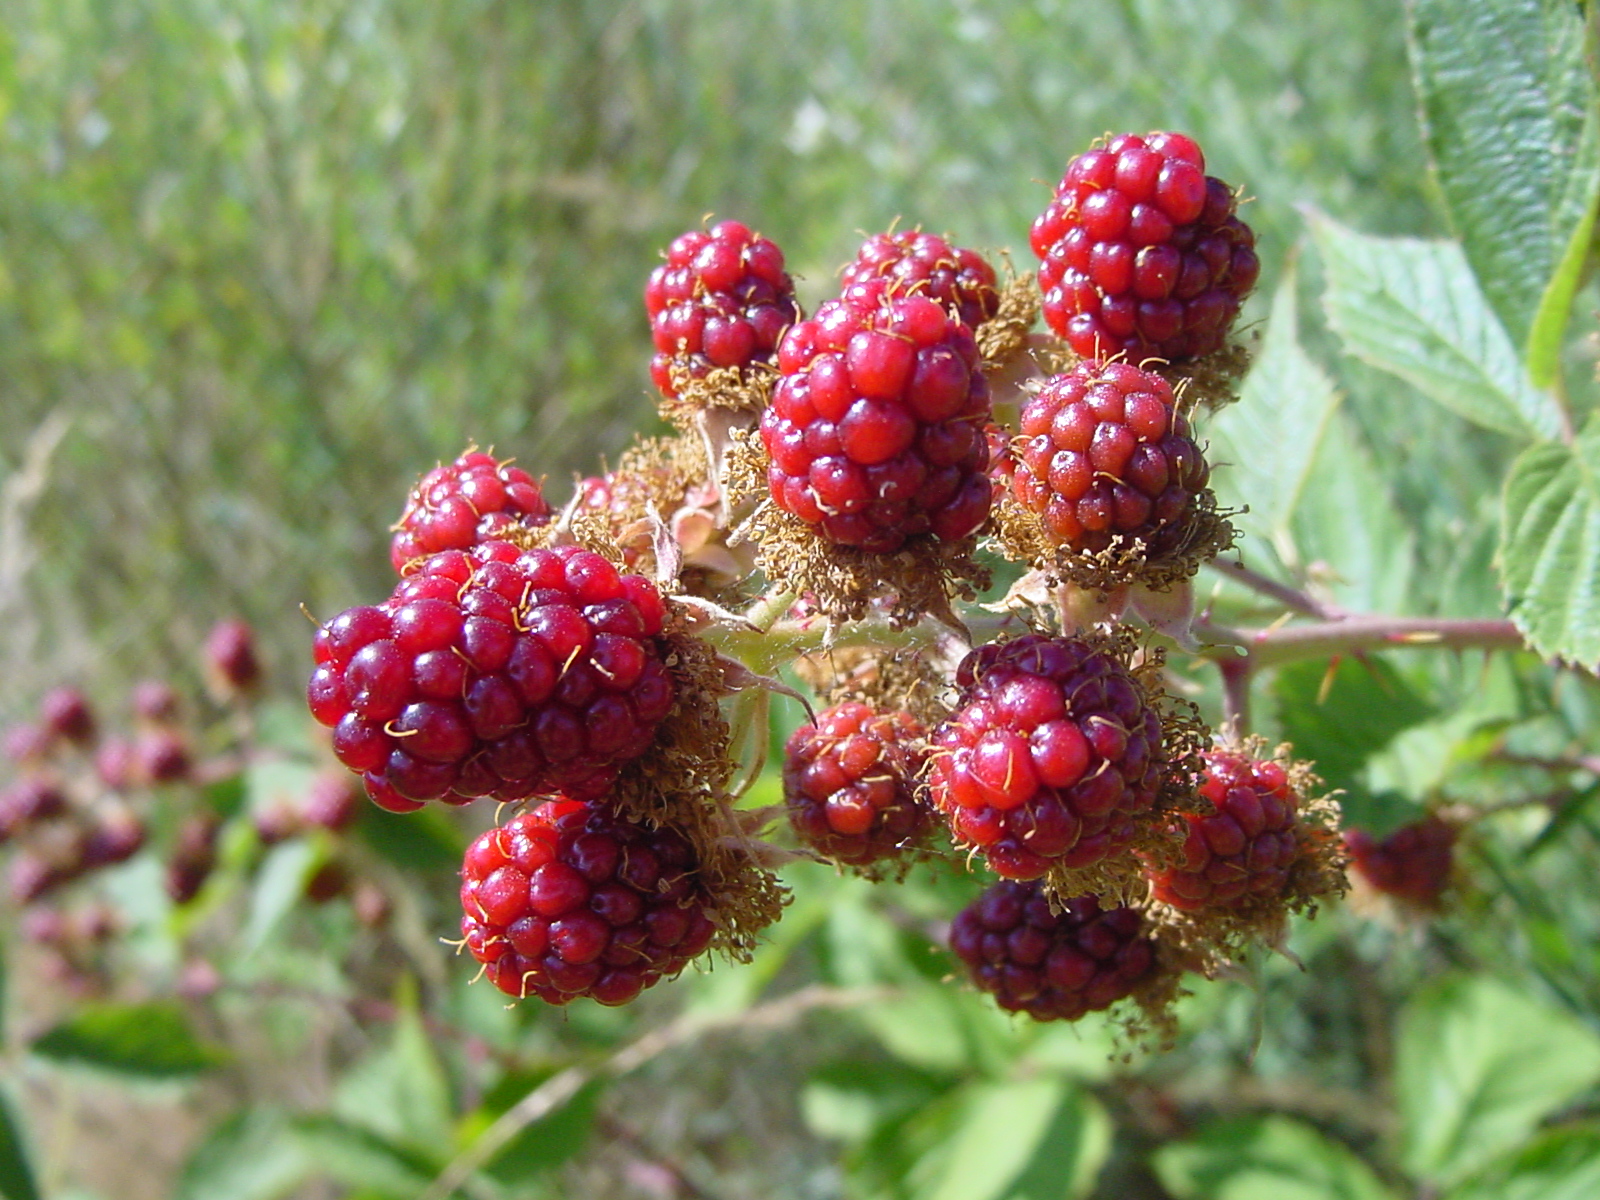 berries blooming on the stems of a plant